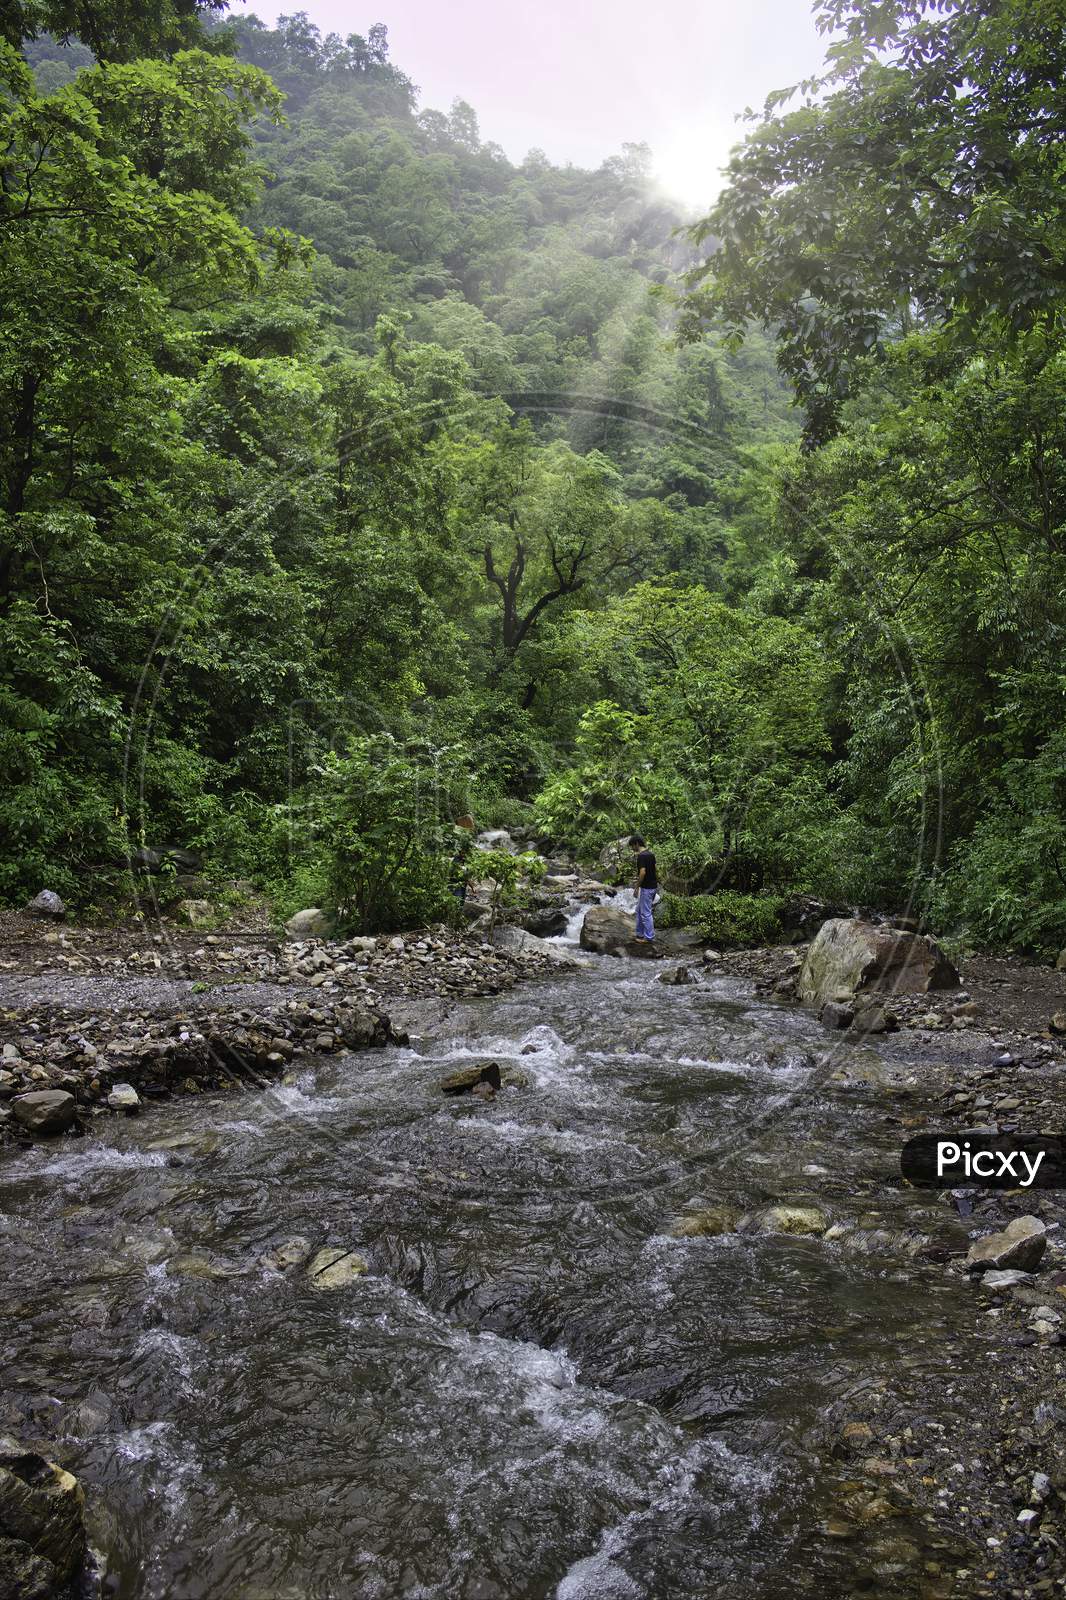 Rishikesh, India - August 18, 2012: A Man Crossing Flowing River In A Forest Hill